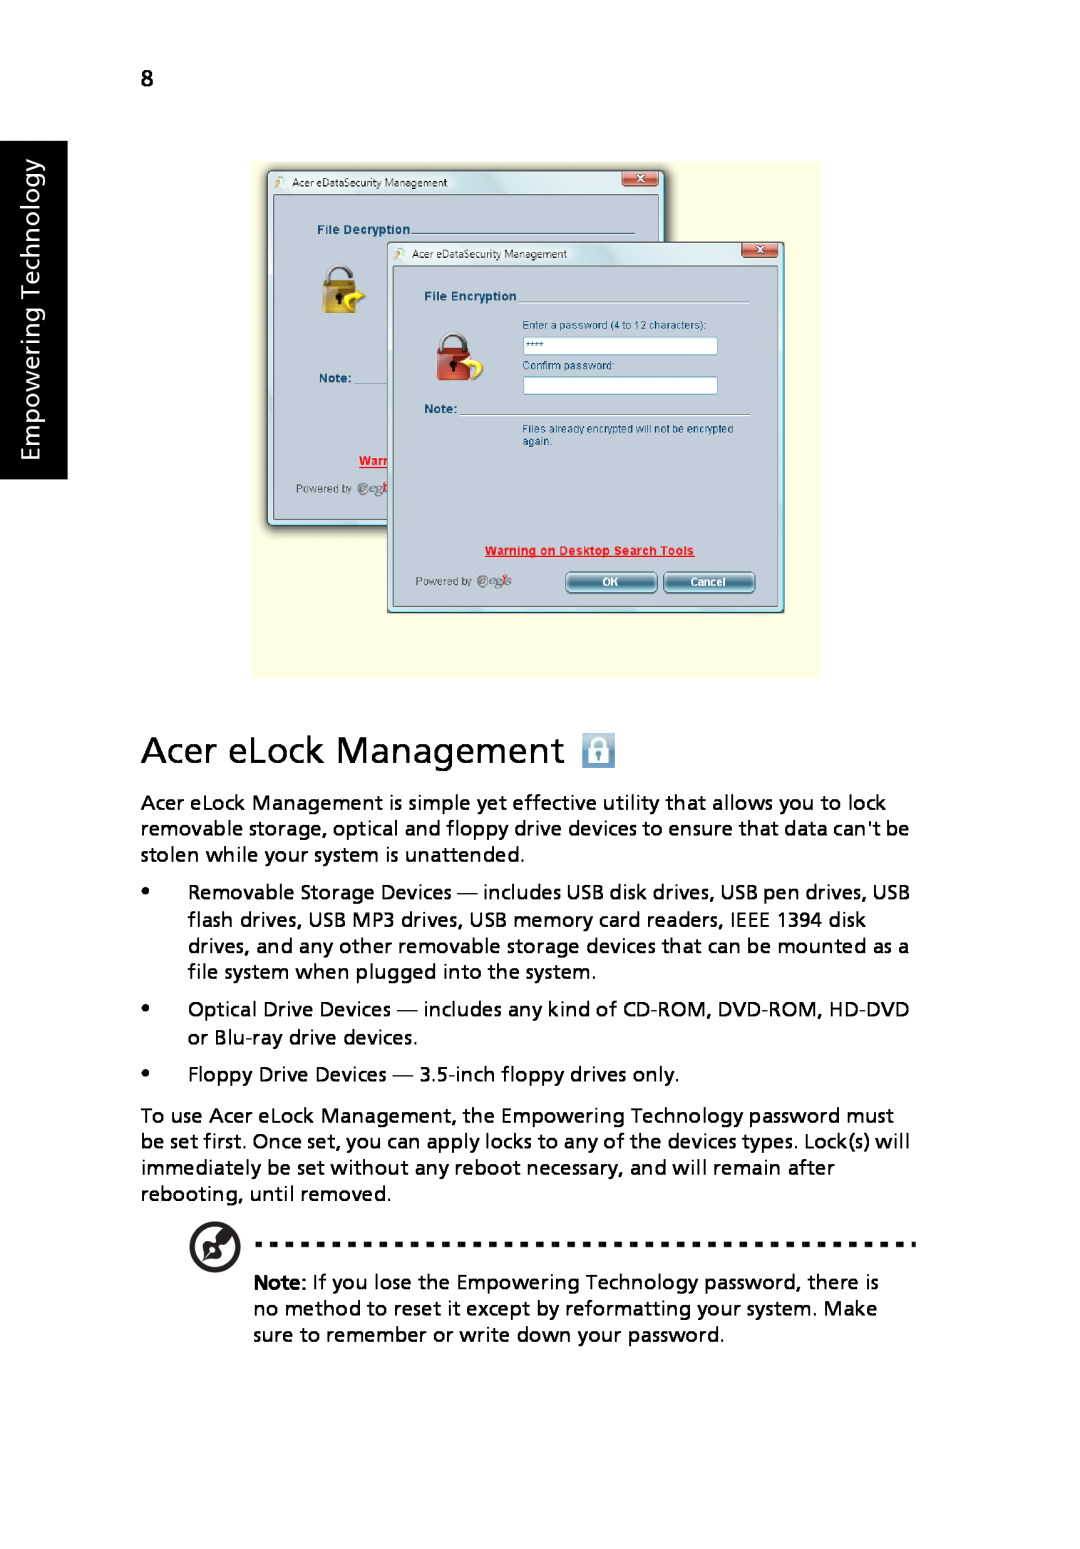 Acer 5410 Series, 5010 Series manual Acer eLock Management, Empowering Technology 